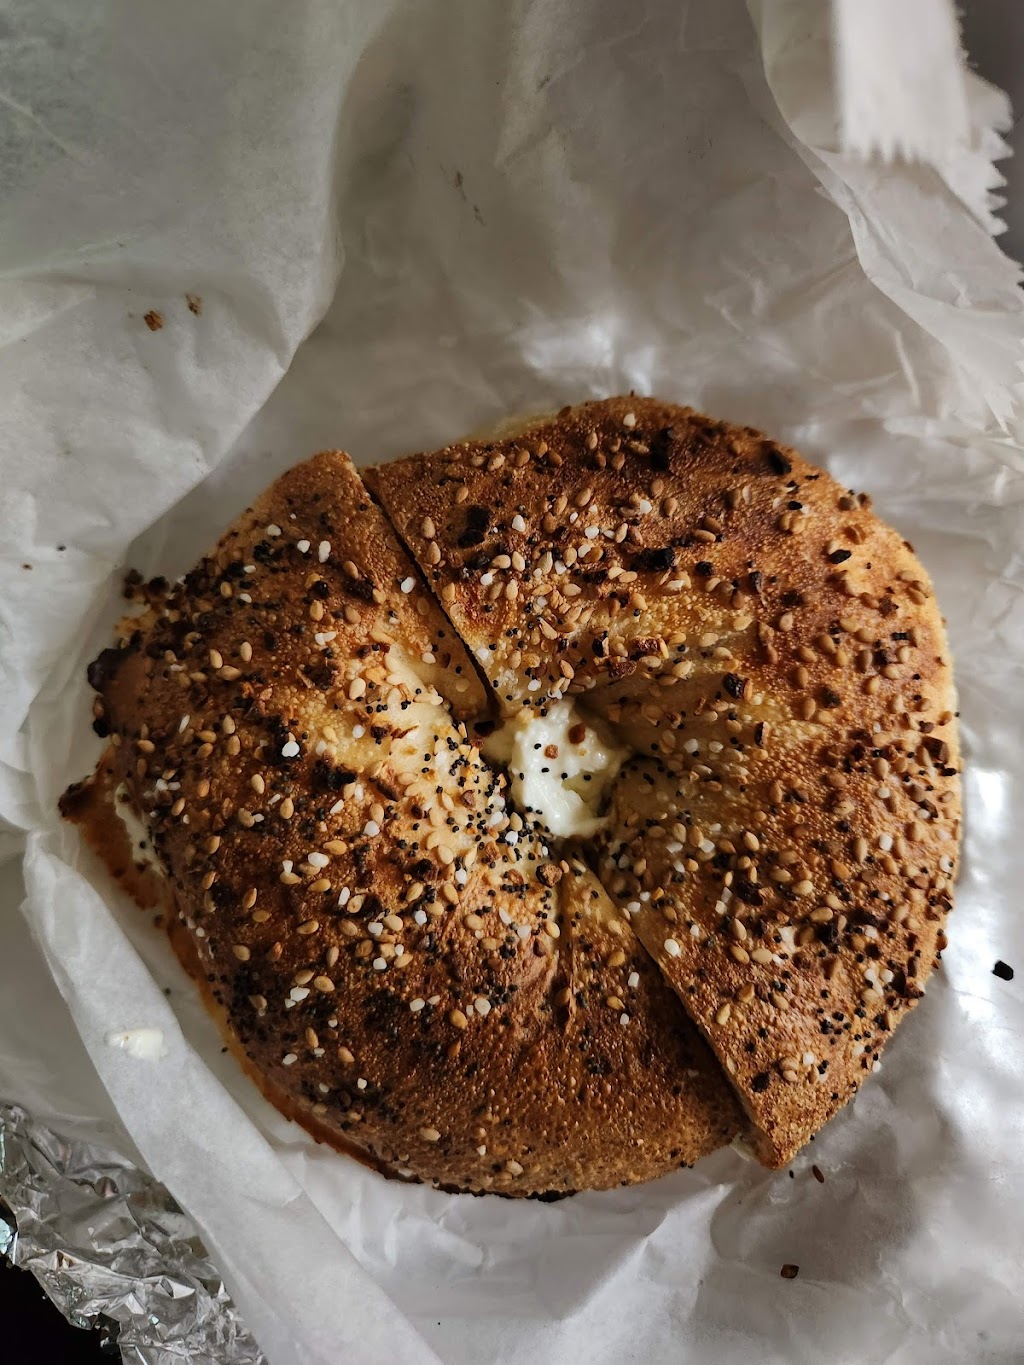 My Three Sons Bagel Cafe (Covert Ave) | 88 Covert Ave, Stewart Manor, NY 11530 | Phone: (516) 437-4447